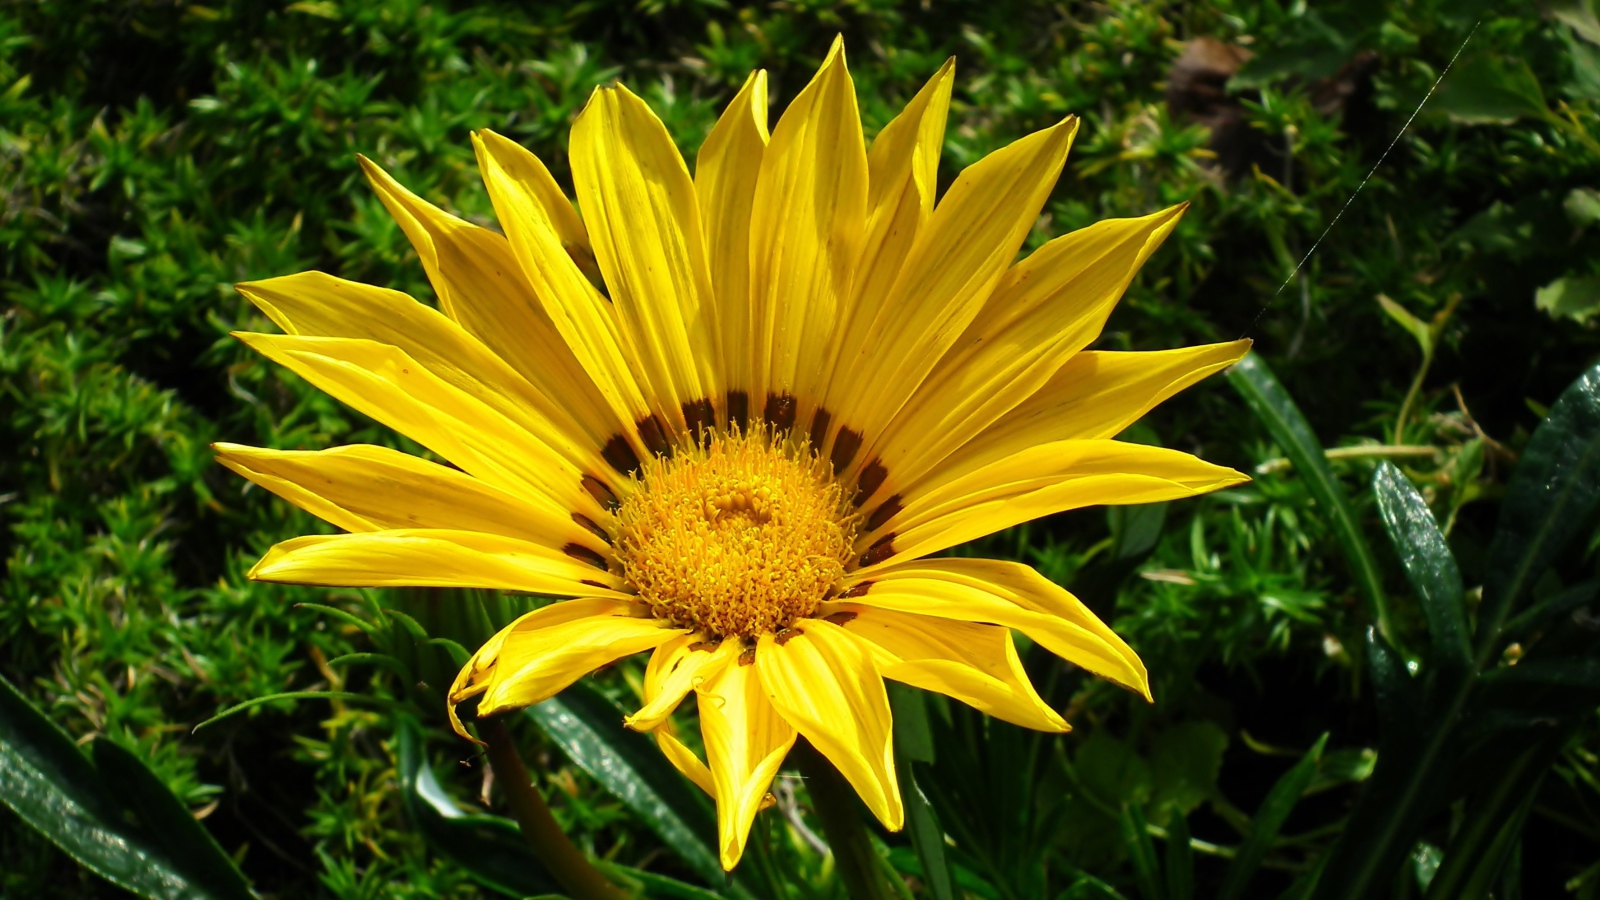 Large yellow gazania flower in a flower bed